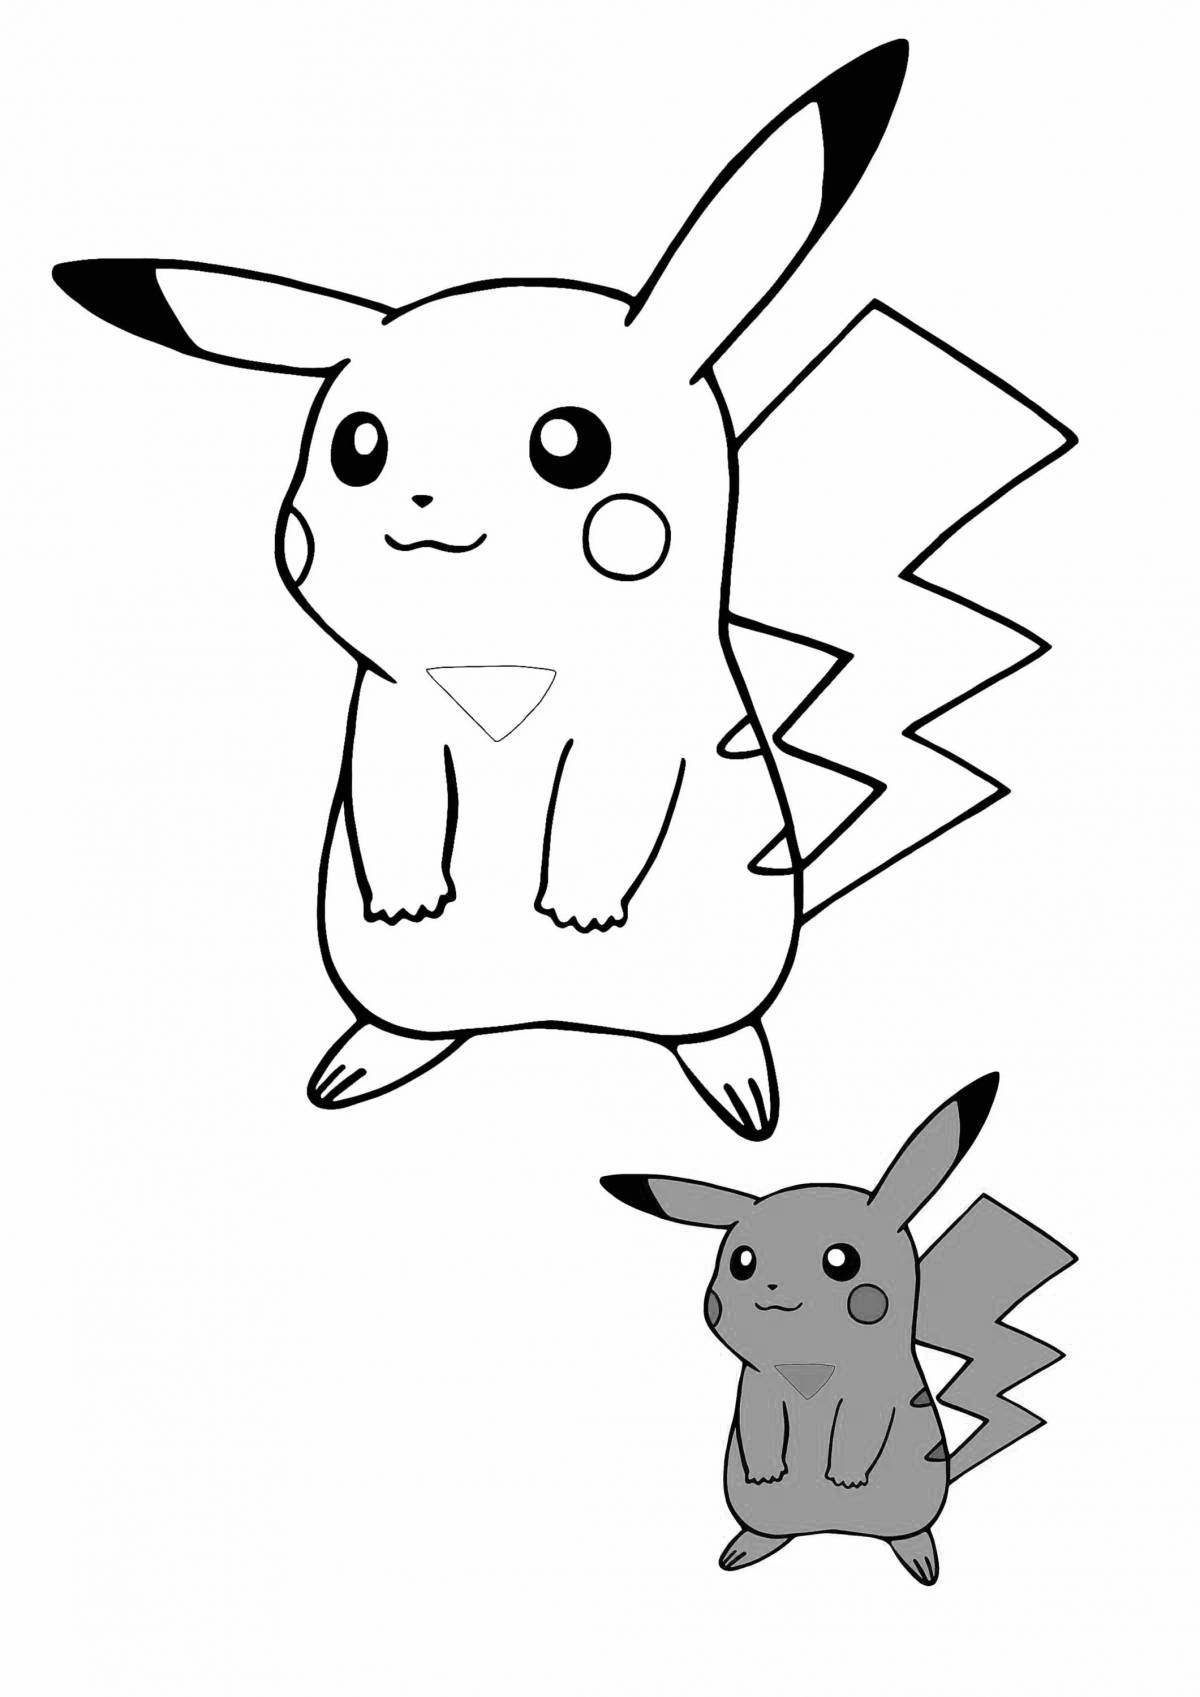 Coloring page dazzling pikachu figurine